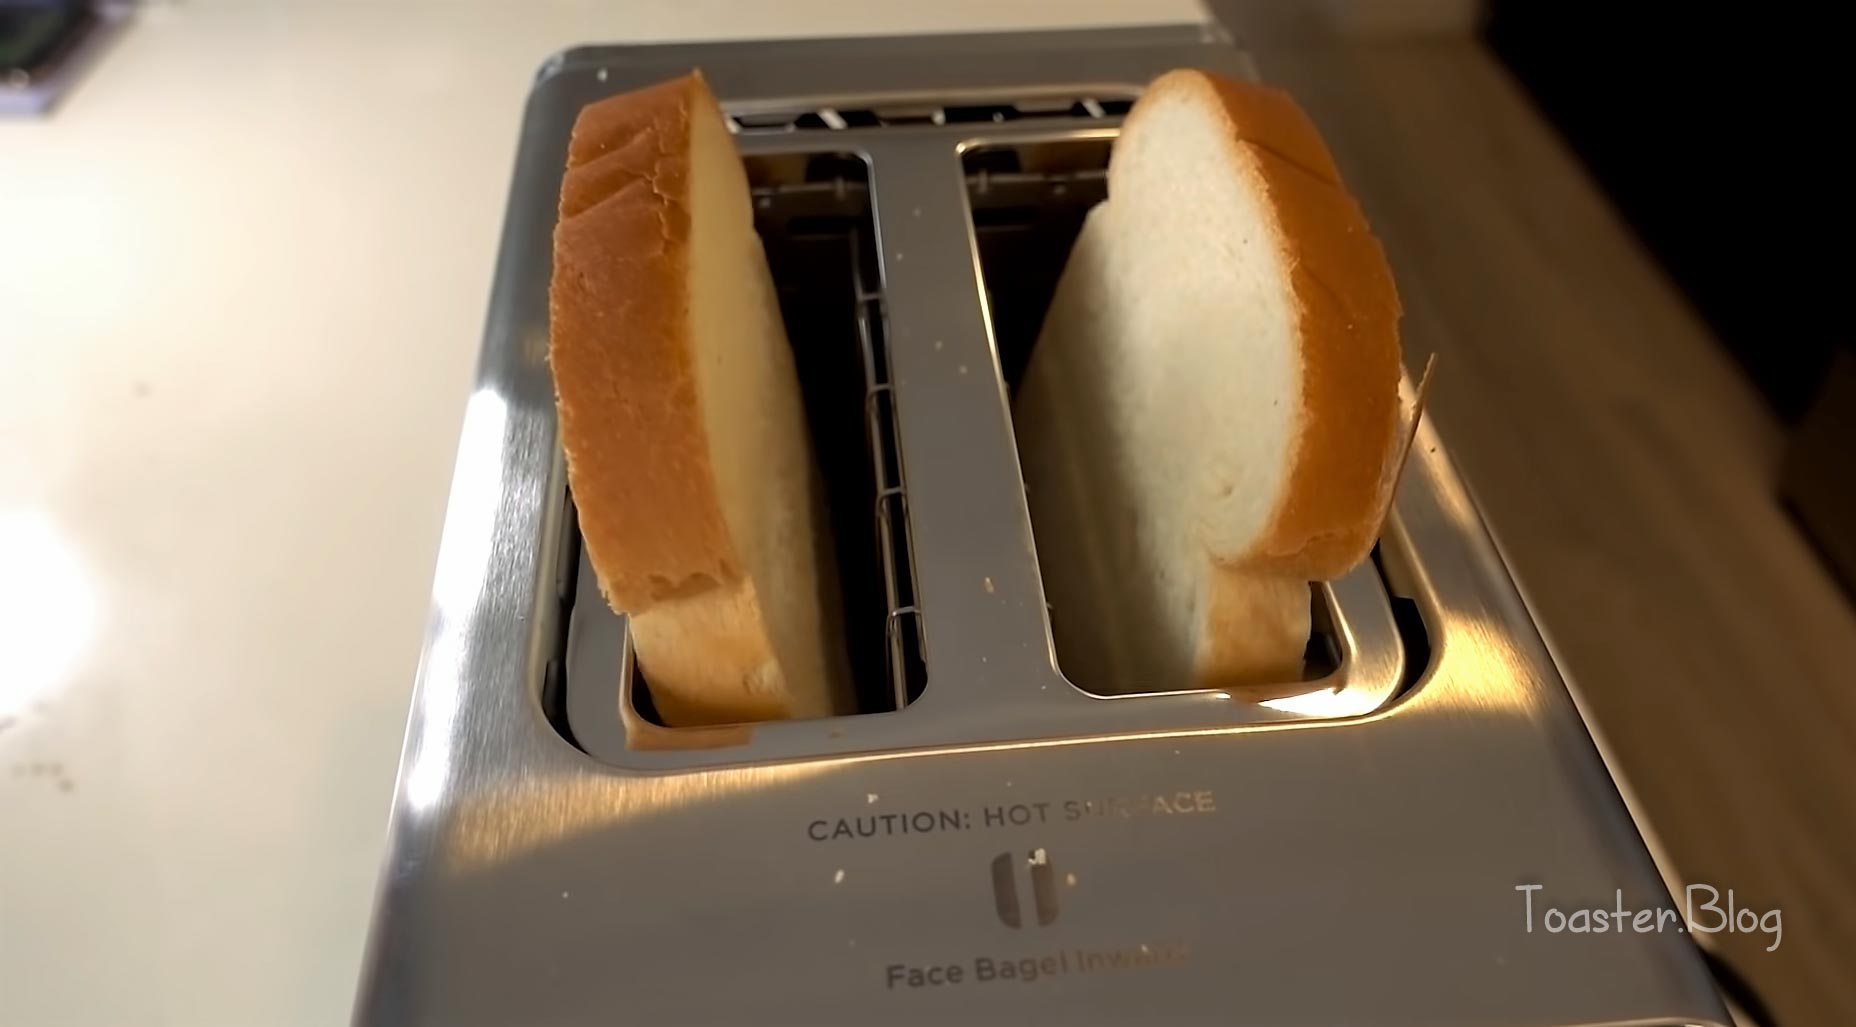 https://toaster.blog/wp-content/uploads/Best-automatic-toaster-1.jpg